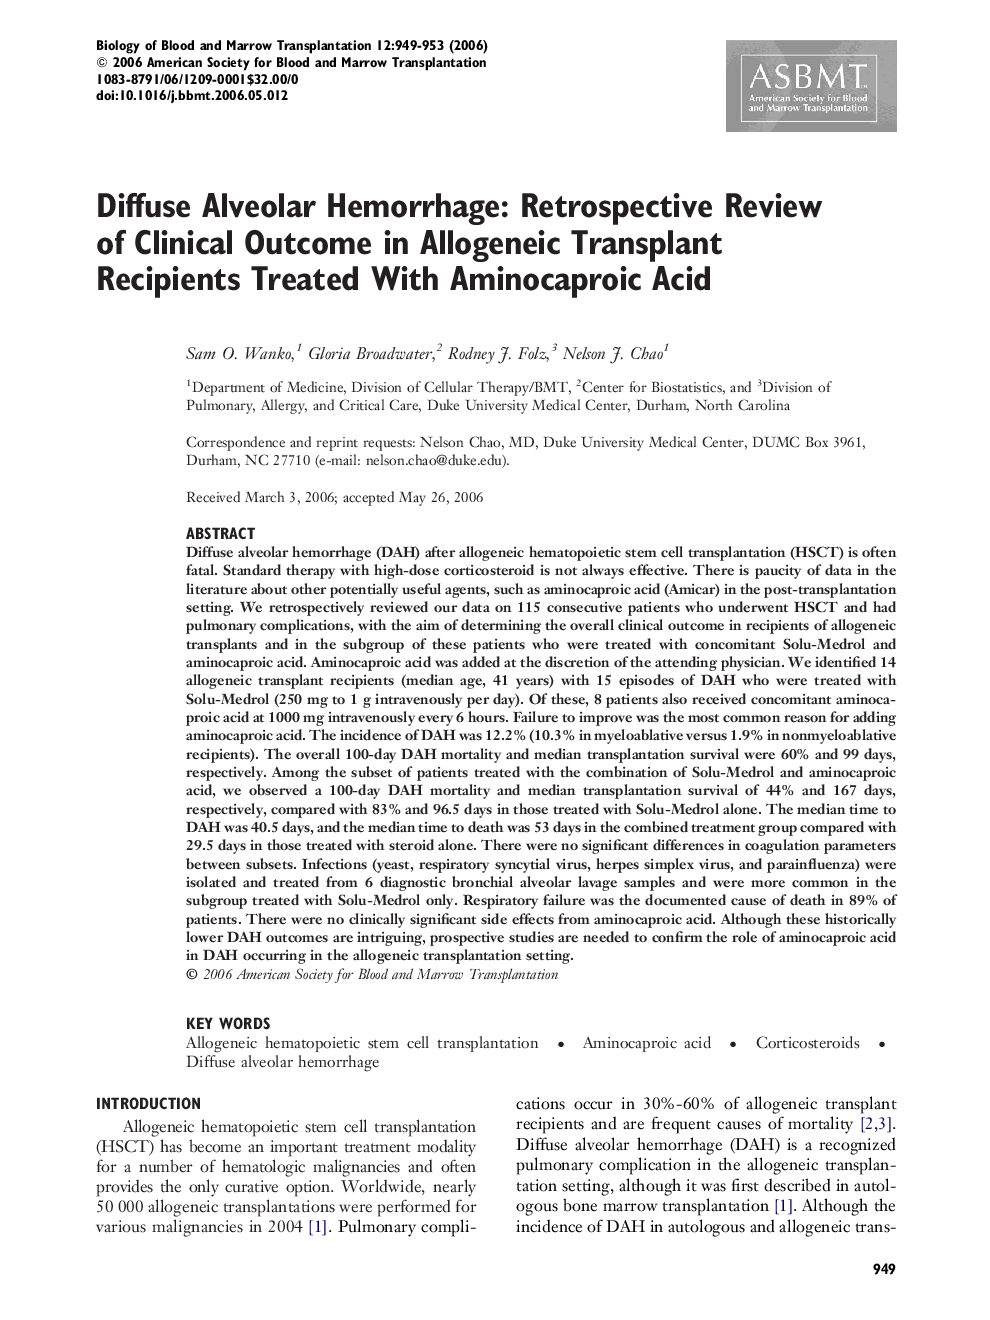 Diffuse Alveolar Hemorrhage: Retrospective Review of Clinical Outcome in Allogeneic Transplant Recipients Treated With Aminocaproic Acid